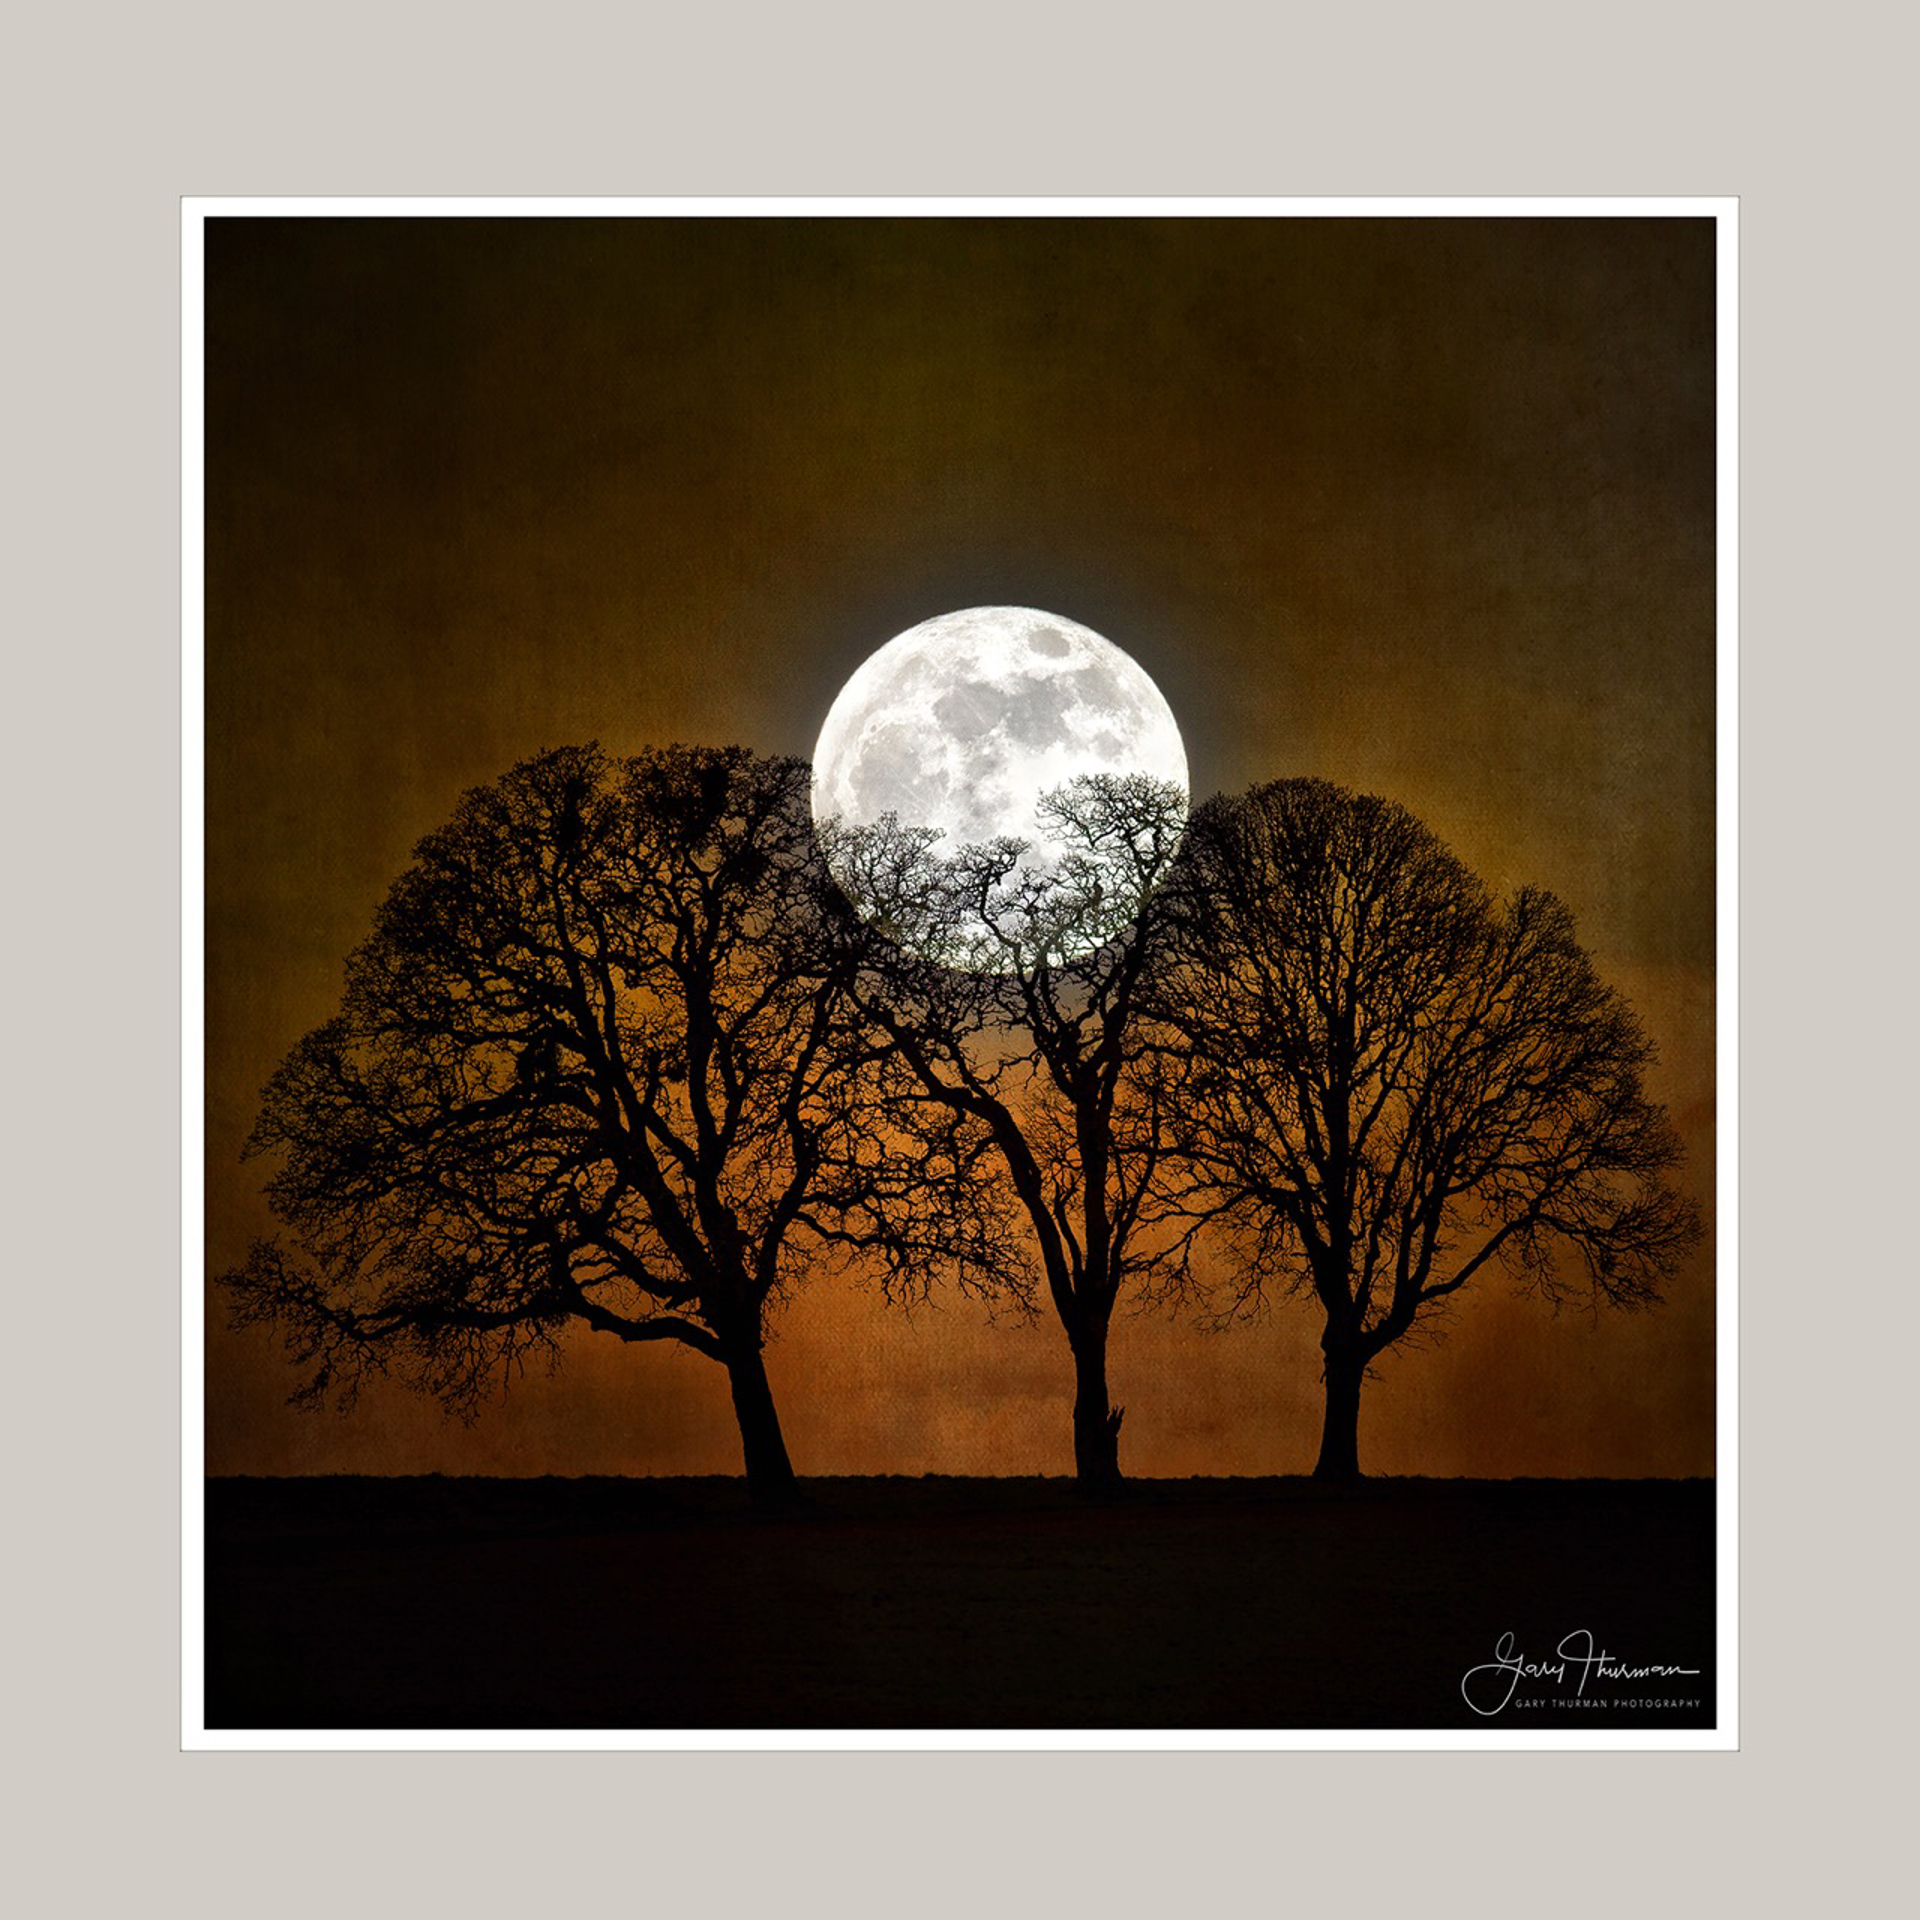 Bad Moon Rising (small) by Gary Thurman (McMinnville, OR)